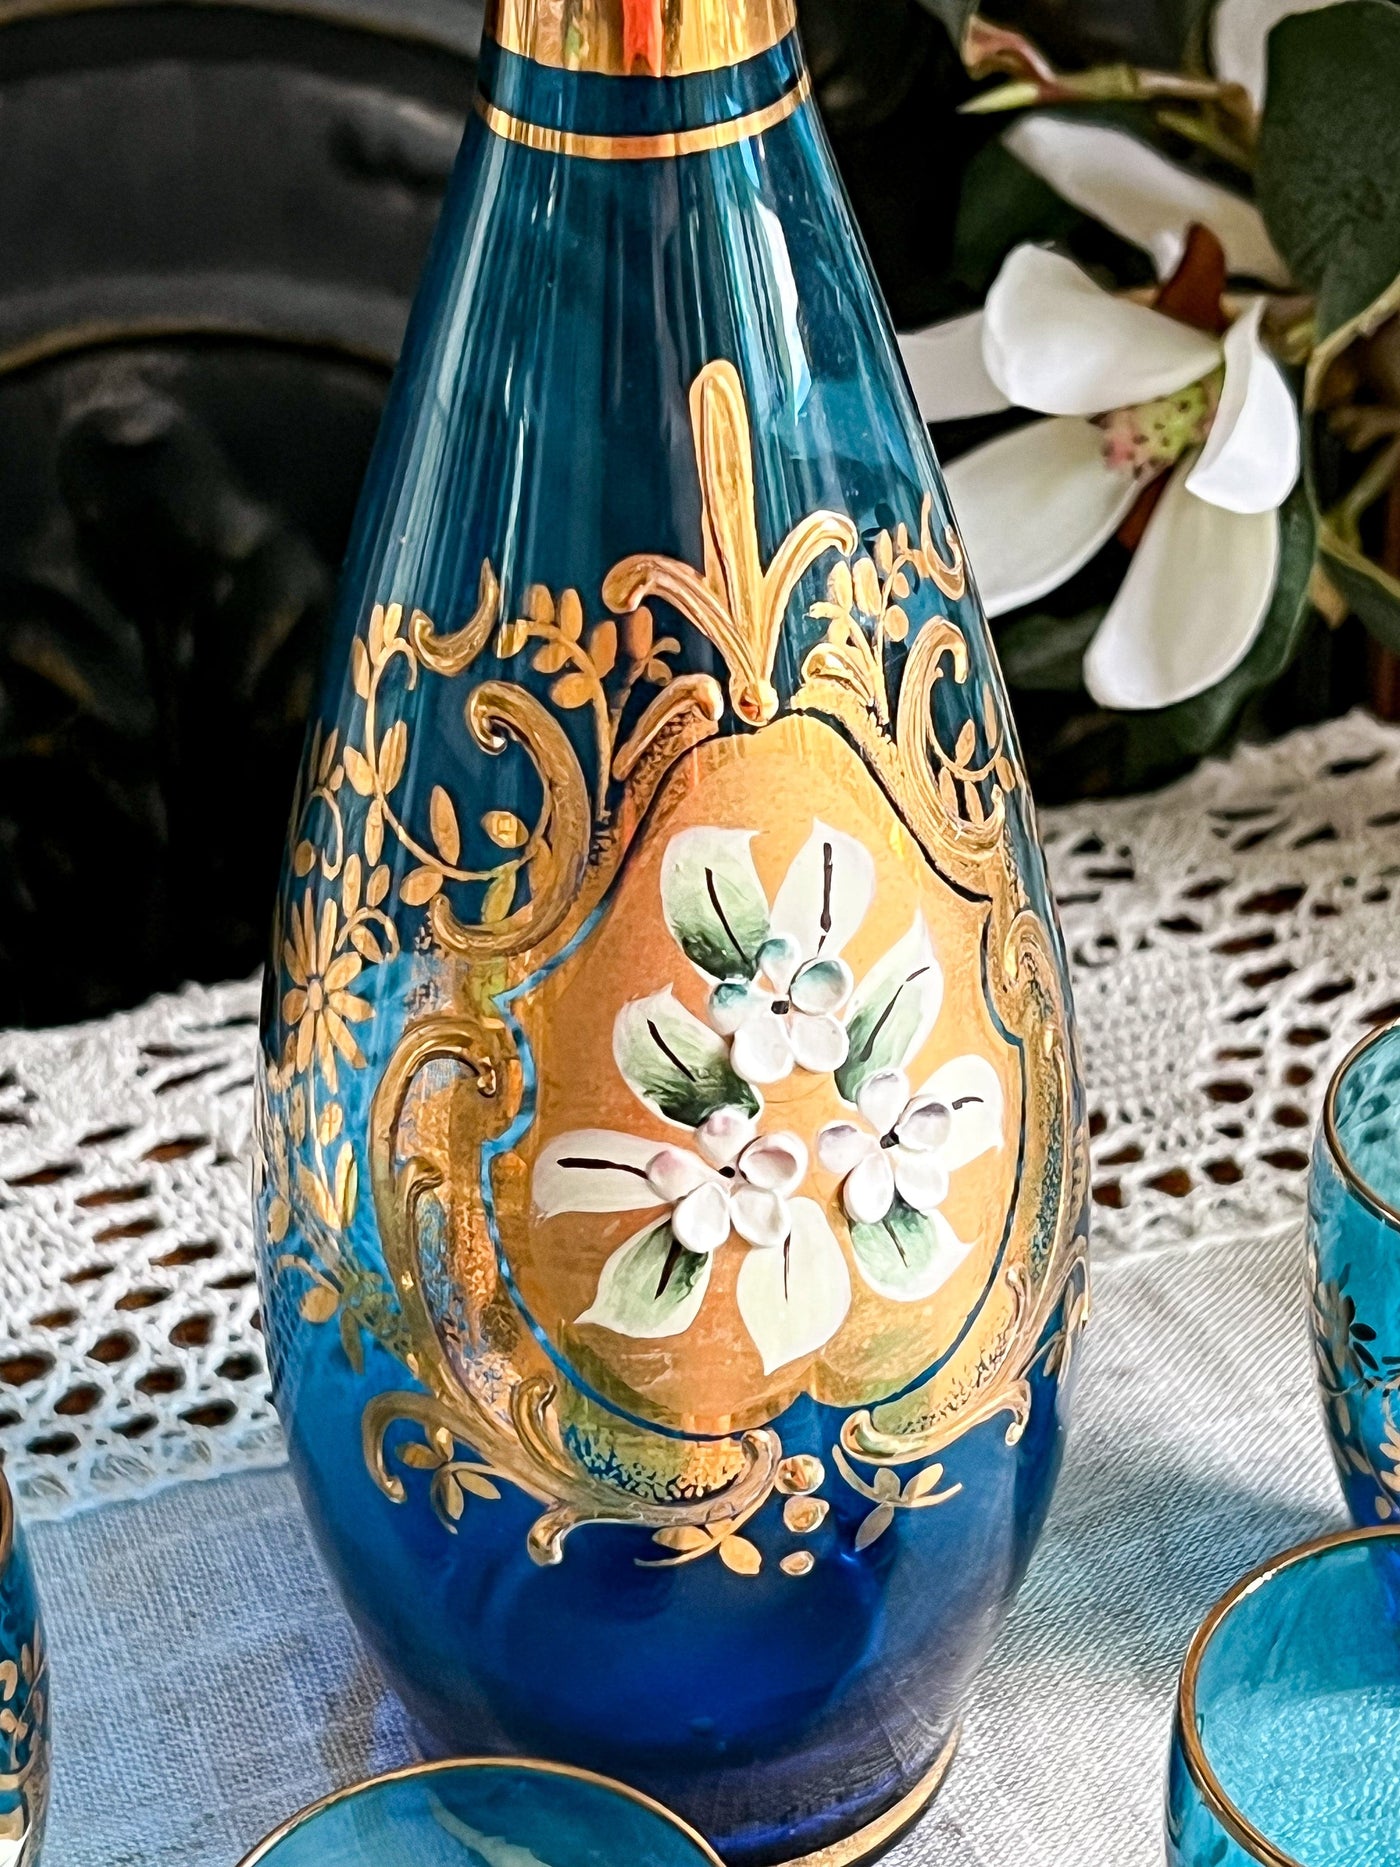 BLUE & GOLD WITH PAINTED FLOWERS CZECH BOHEMIAN DECANTER WITH 6 GLASSES Revive In Style Vintage Furniture Painted Refinished Redesign Beautiful One of a Kind Artistic Antique Unique Home Decor Interior Design French Country Shabby Chic Cottage Farmhouse Grandmillenial Coastal Chalk Paint Metallic Glam Eclectic Quality Dovetailed Rustic Furniture Painter Pinterest Bedroom Living Room Entryway Kitchen Home Trends House Styles Decorating ideas